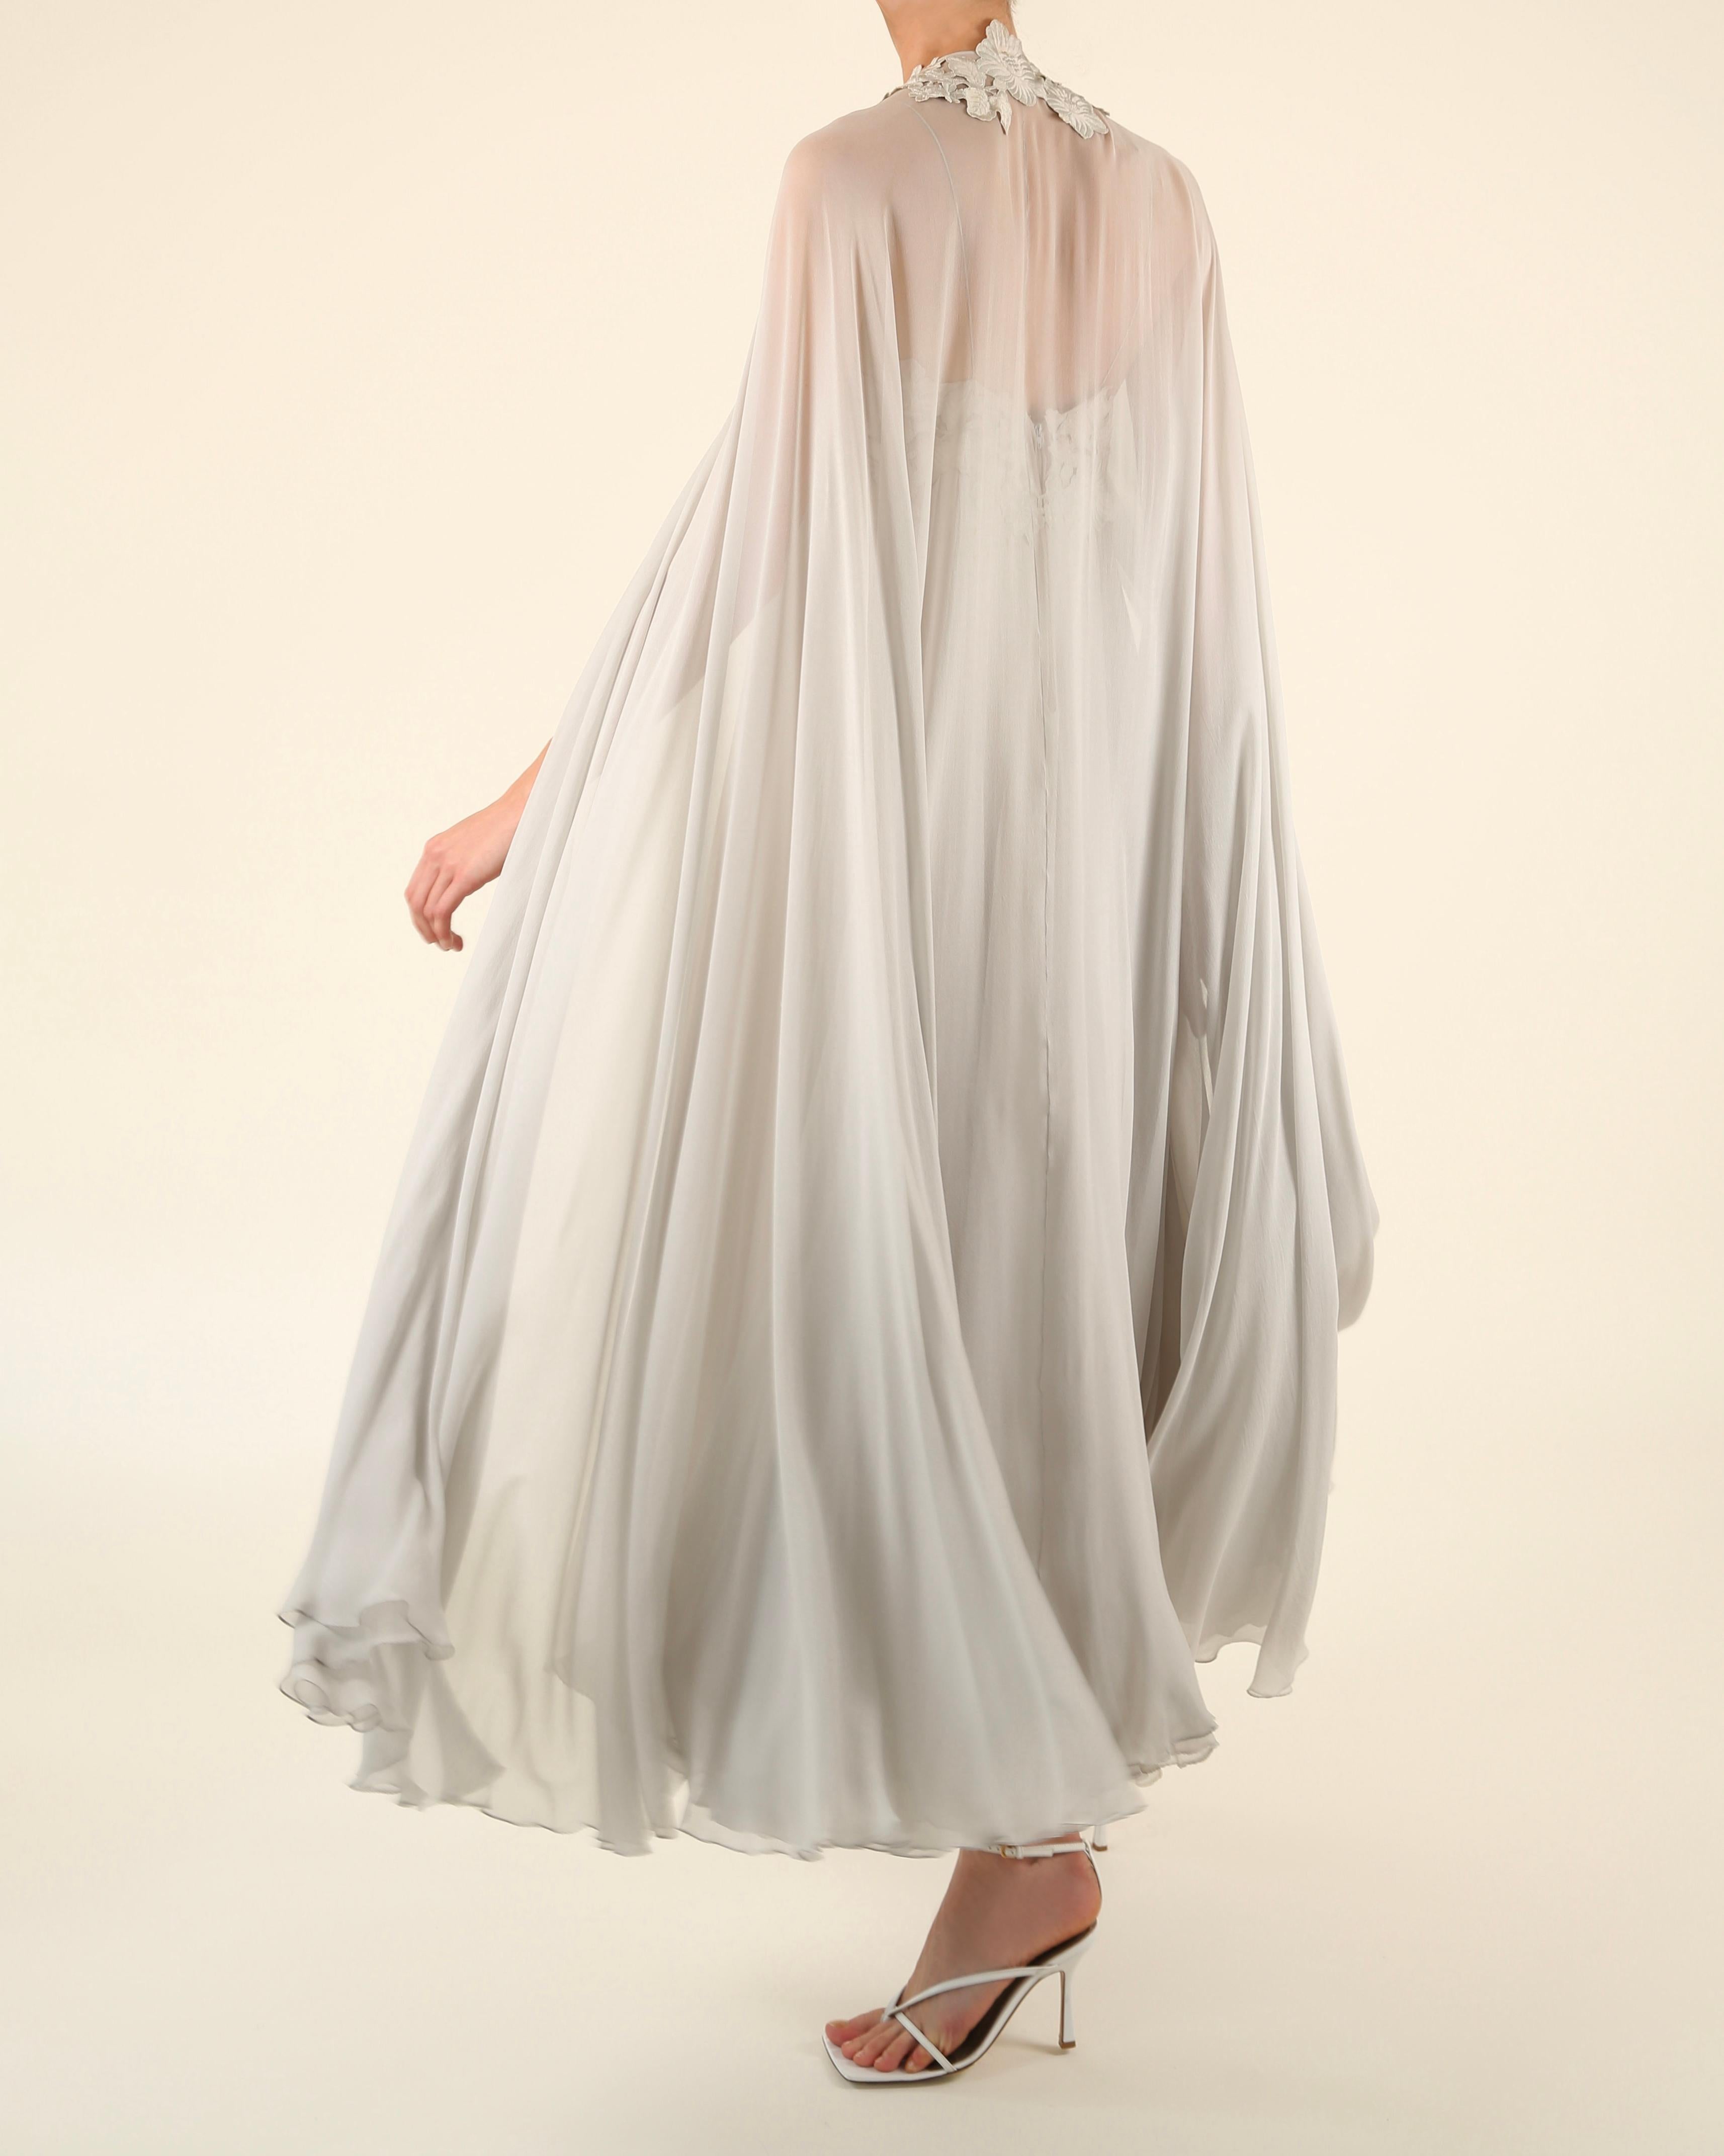 George Stavropoulous 70's sheer cape & silk chiffon layered floral gown dress For Sale 12